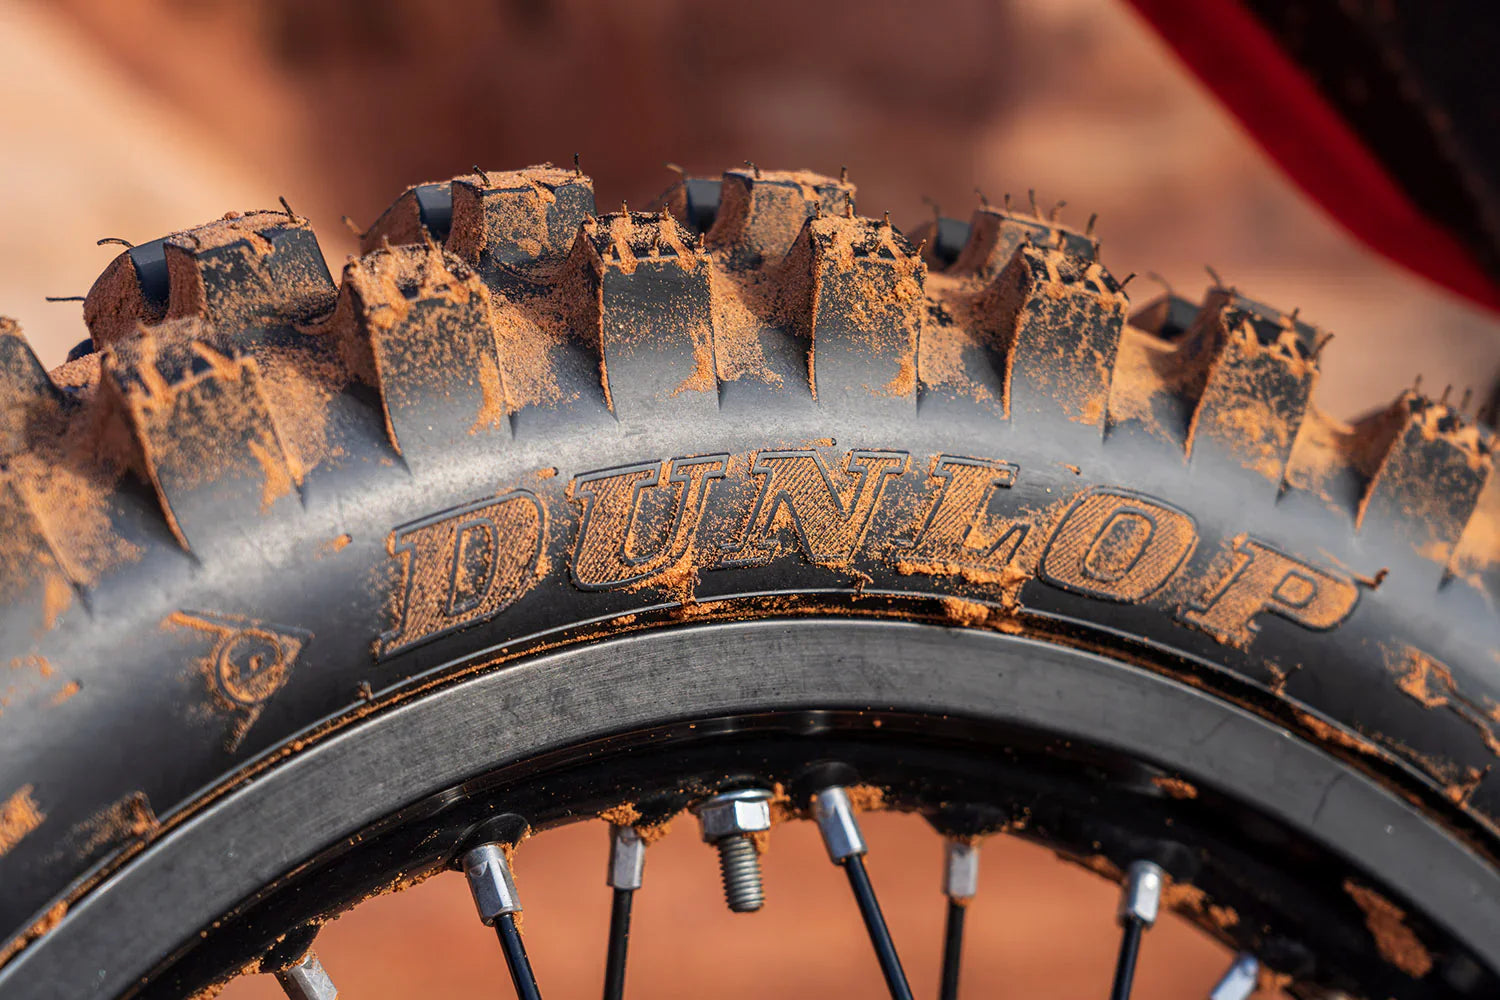 TESTED: DUNLOP GEOMAX AT81 FRONT AND AT81 EX REAR